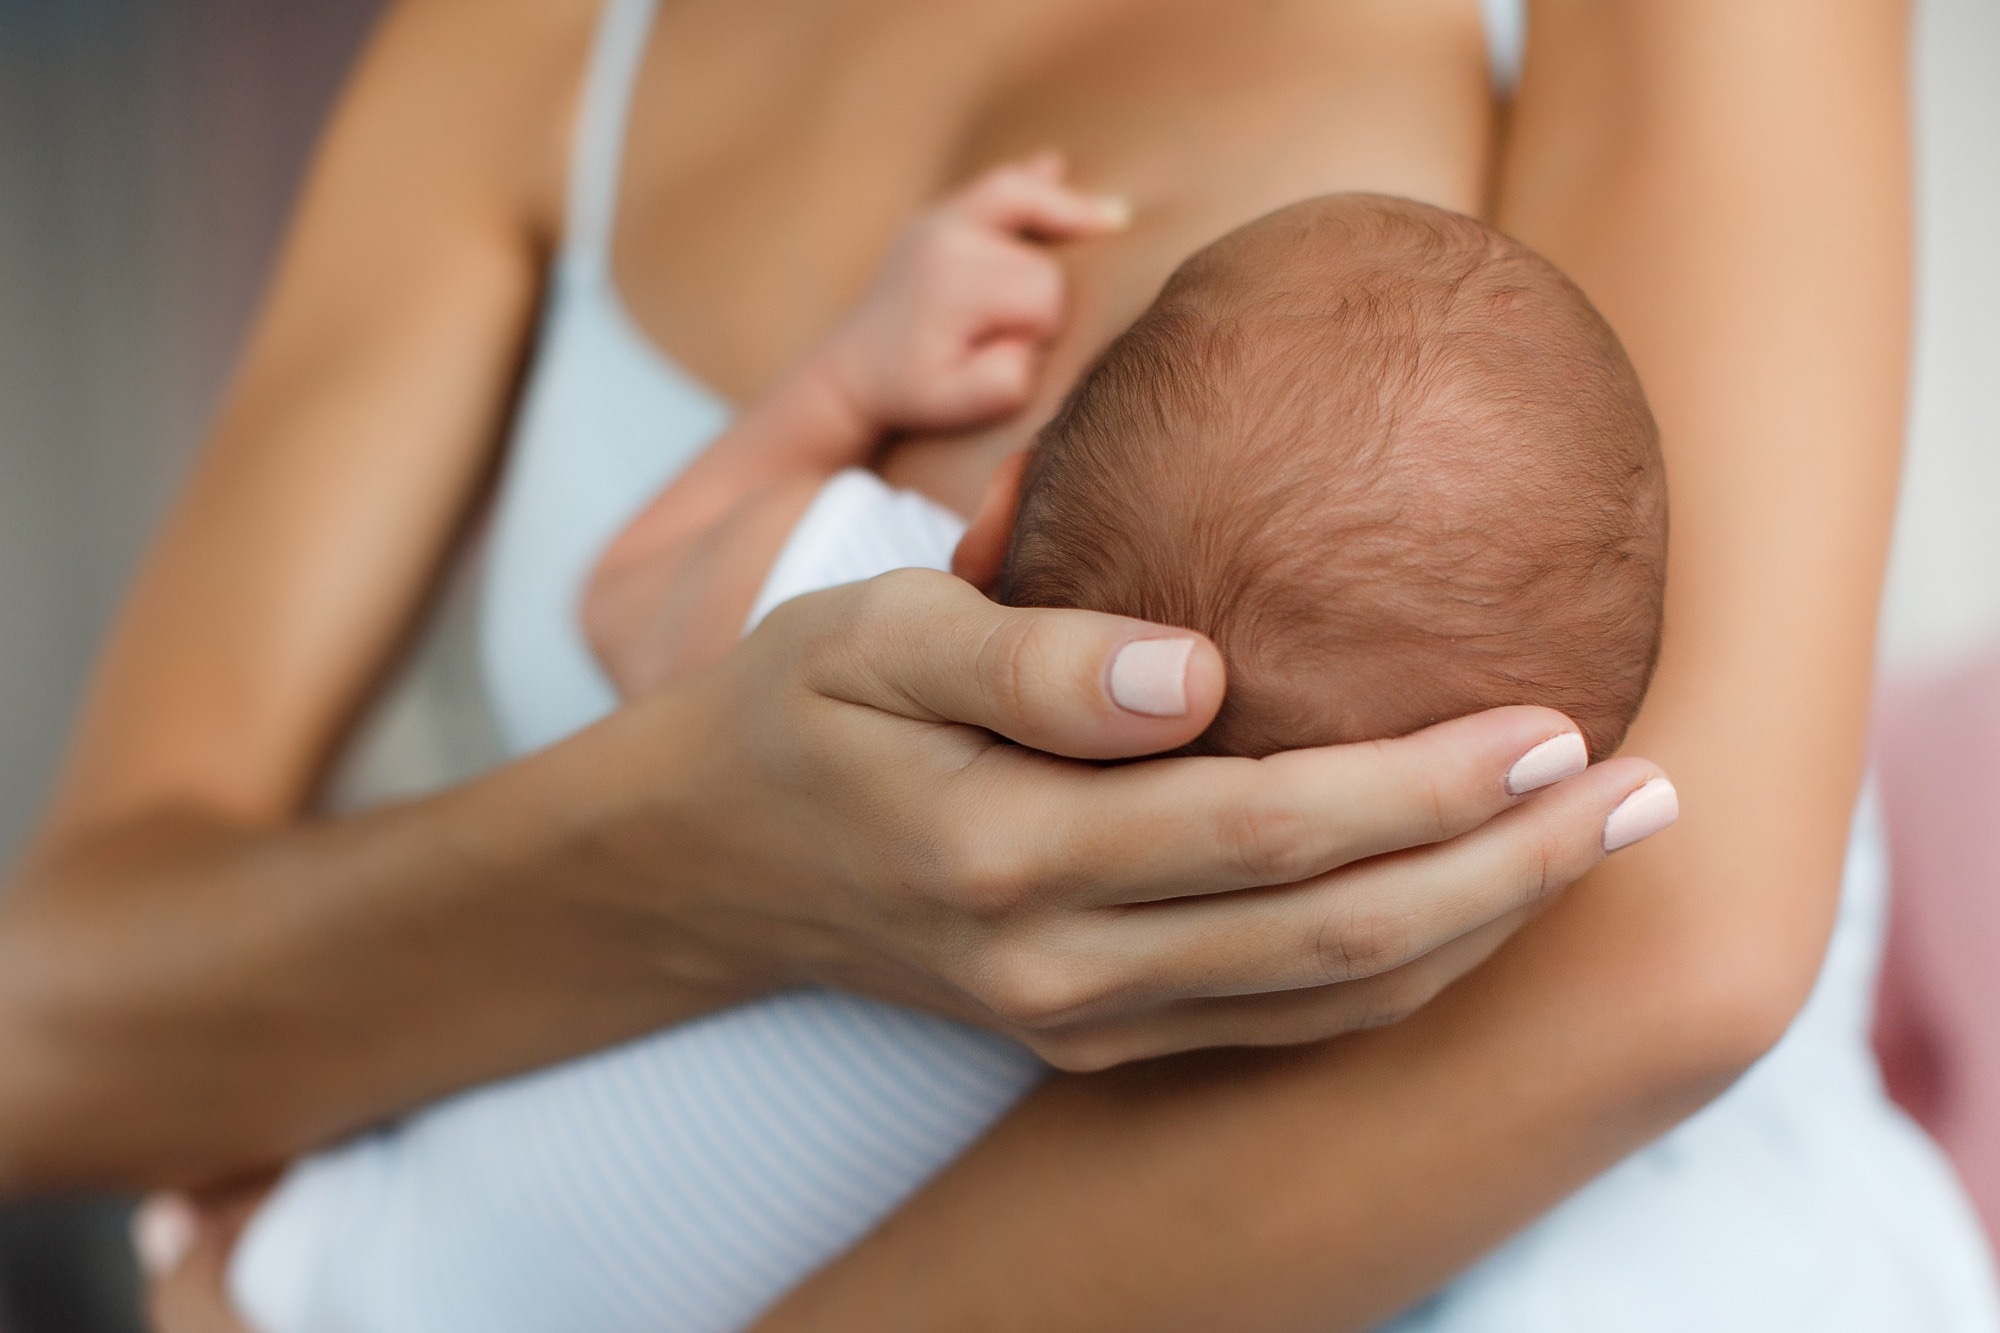 Study: Fact-based nutrition for infants and lactating mothers—The NUTRISHIELD study. Image Credit: HTeam / Shutterstock